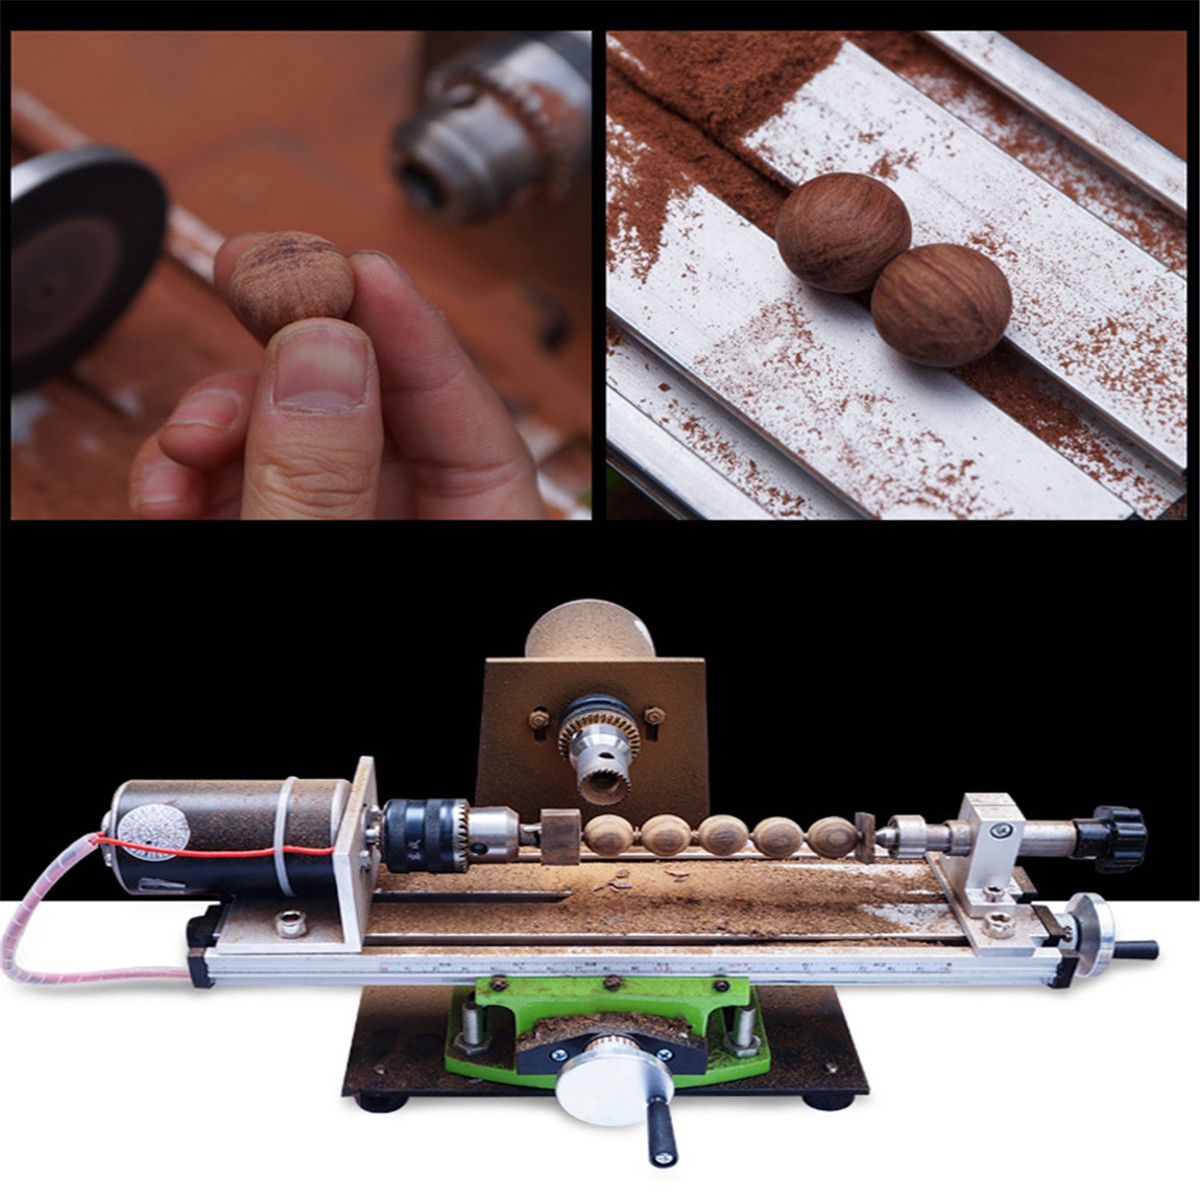 DIY-MINI-Wood-Beads-Lathe-Machine-Dual-Working-Drill-Sliding-Compound-Router-Table-1522707